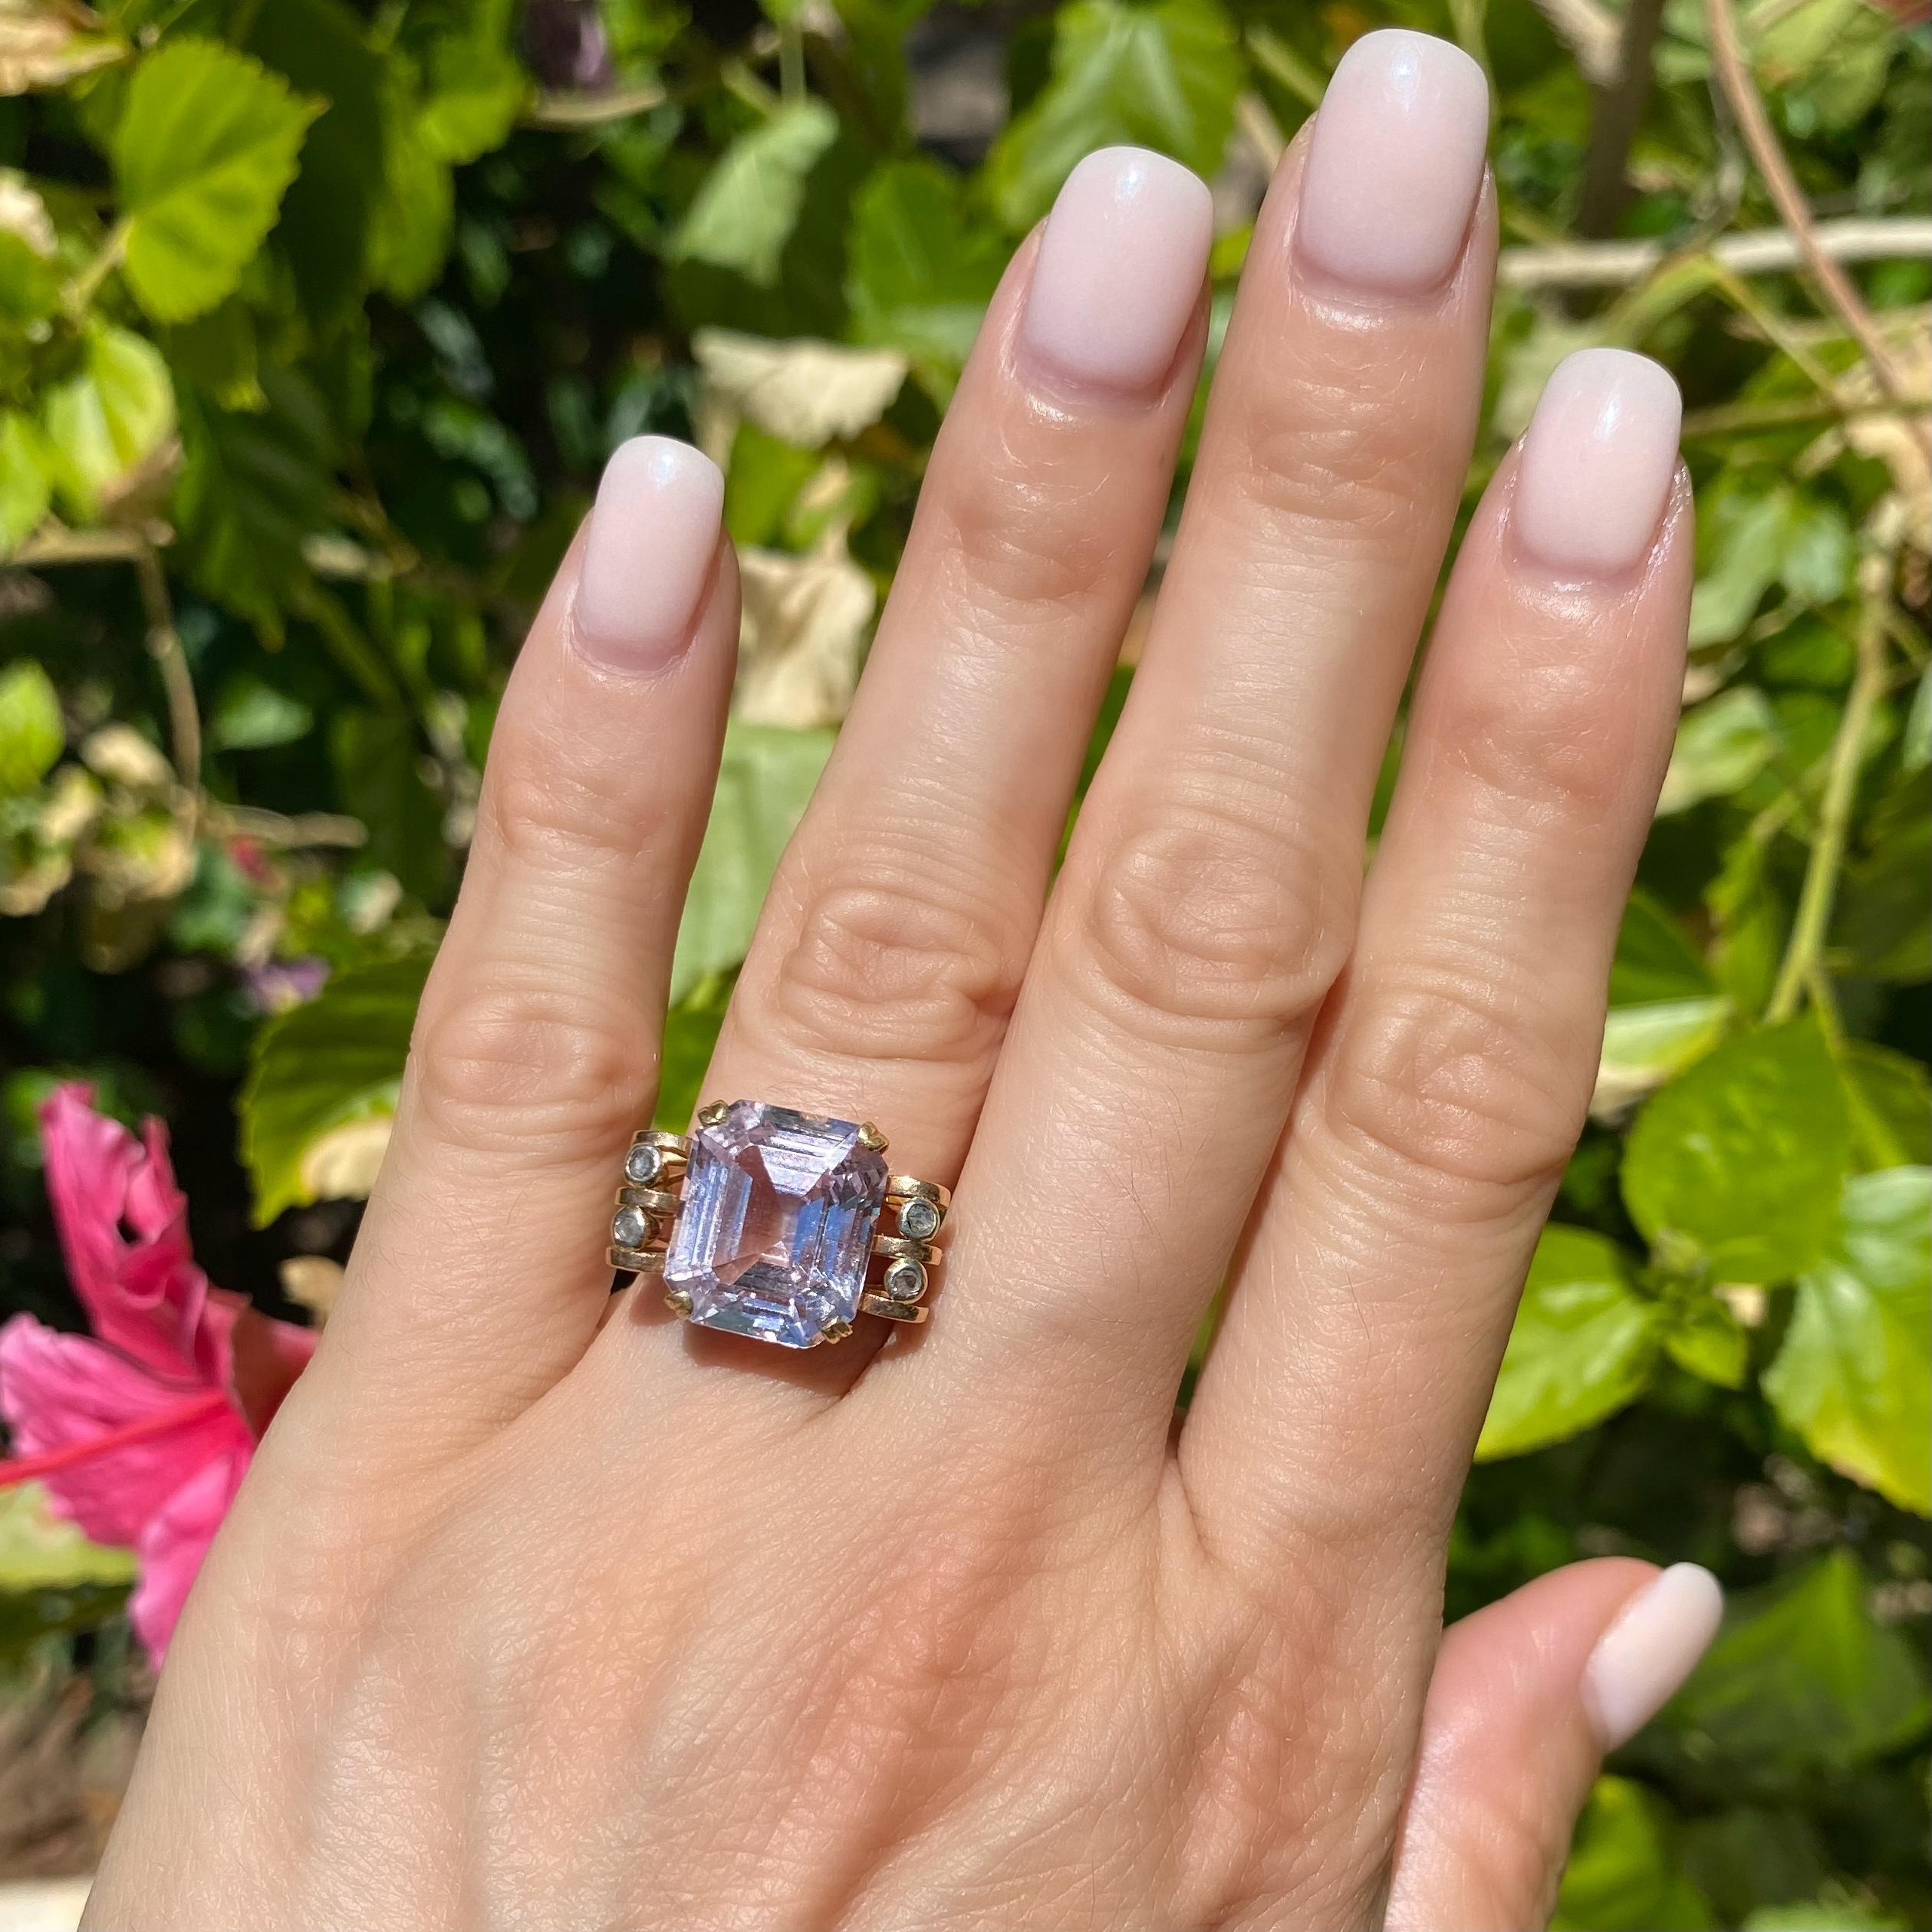 Simply Beautiful! Statement Solitaire Amethyst and Diamond Gold Cocktail Ring. Centering a securely nestled Hand set 5 Carat Emerald-cut Light Amethyst, accented on two levels by Diamonds, approx. 0.03tcw. Hand crafted 18K Rose Gold mounting.